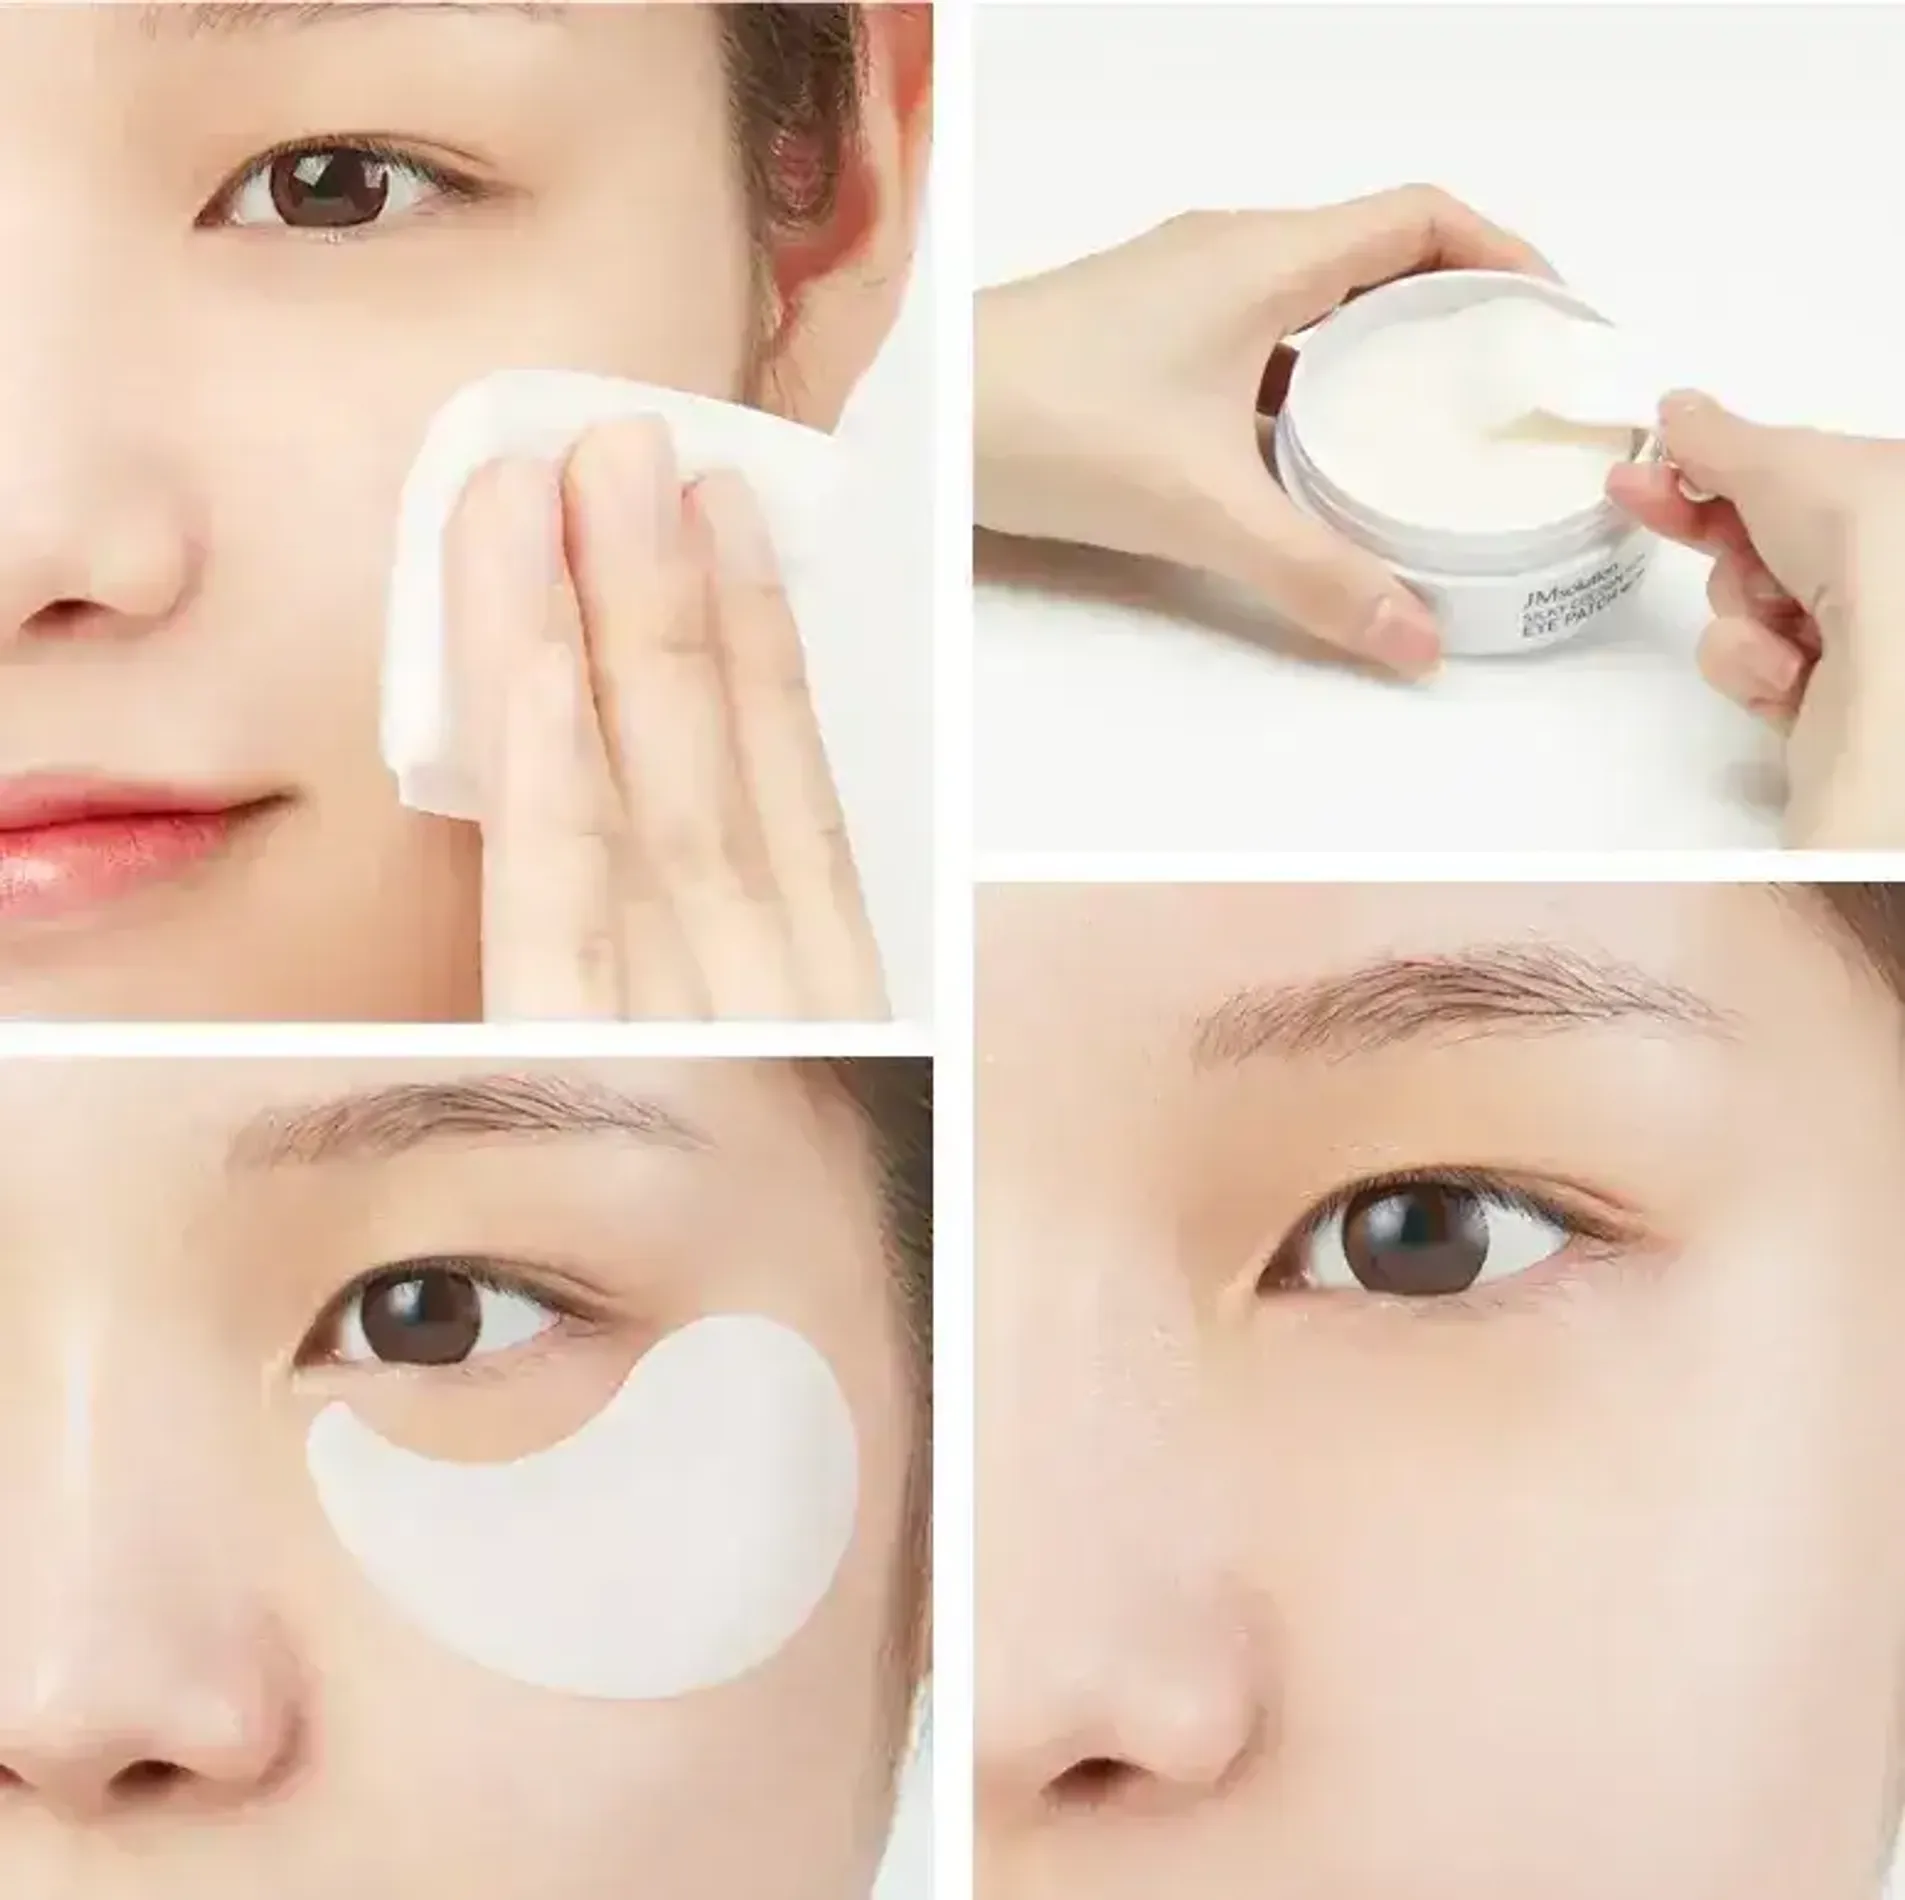 mat-na-mat-jmsolution-white-cocoon-home-esthetic-eye-patch-jmsolution-white-cocoon-home-esthetic-eye-patch-2